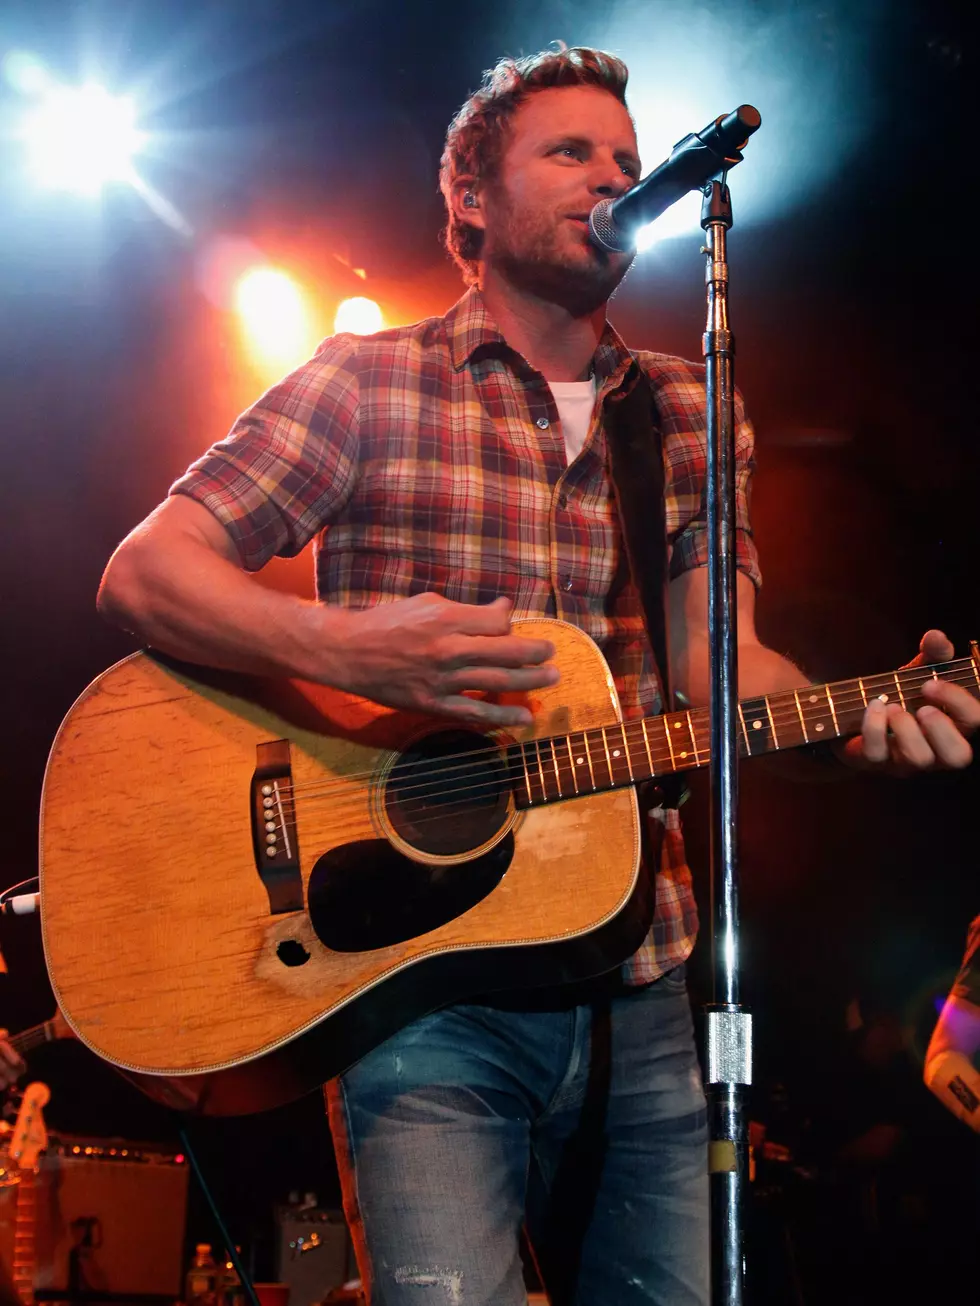 1 Day until Christmas&#8230;get Dierks tickets today to give tomorrow